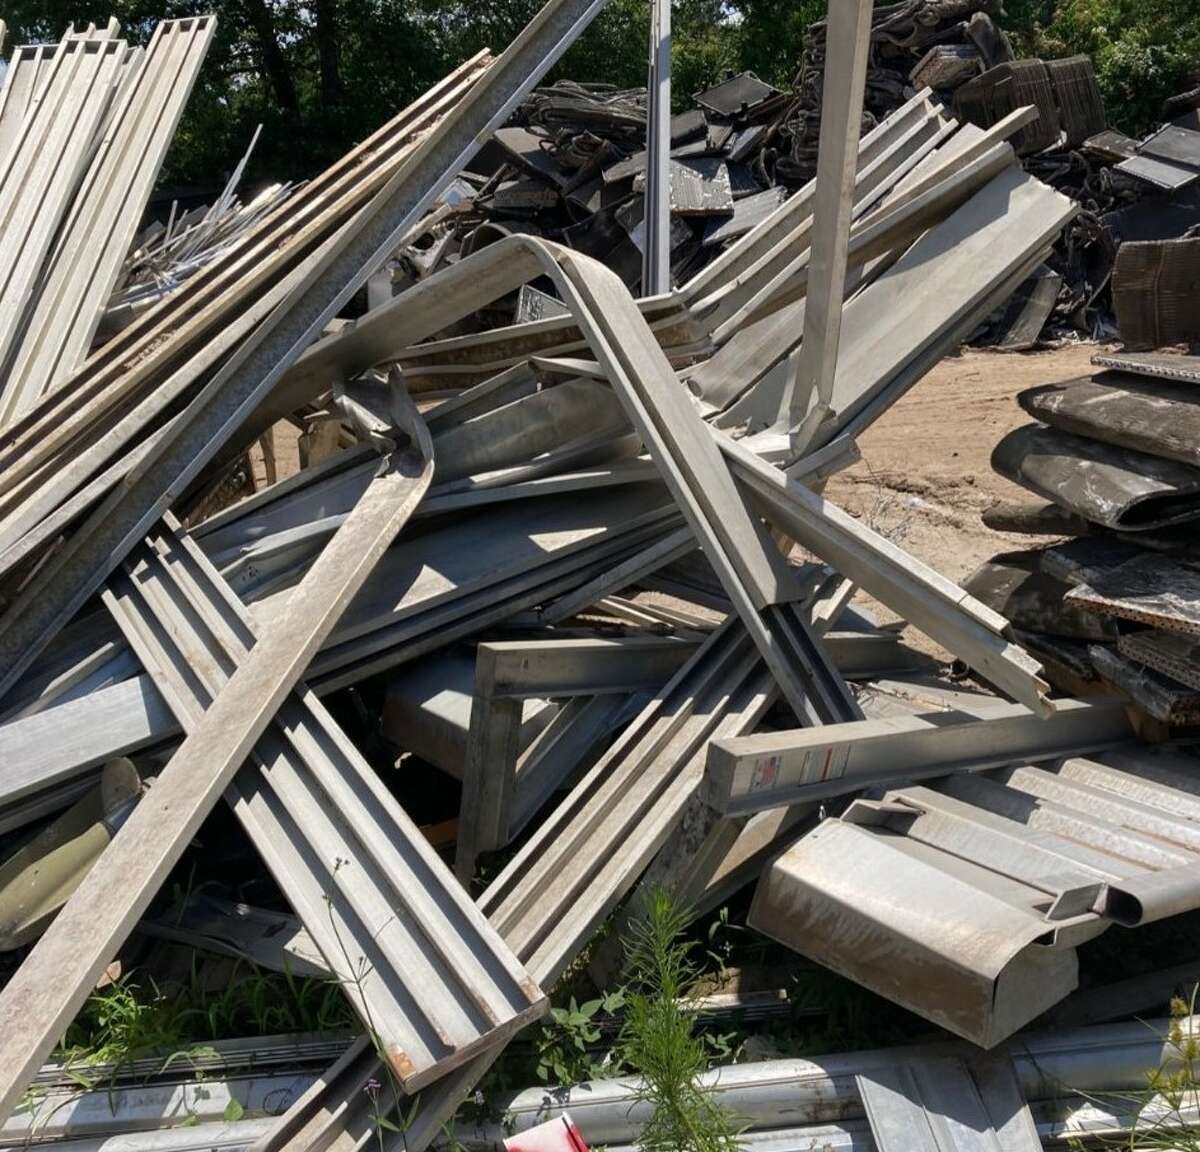 Montgomery County Precinct 4 deputies arrested a man on July 12, 2022, for allegedly stealing $10,000 worth of bleacher planks from Bull Sallas Park.